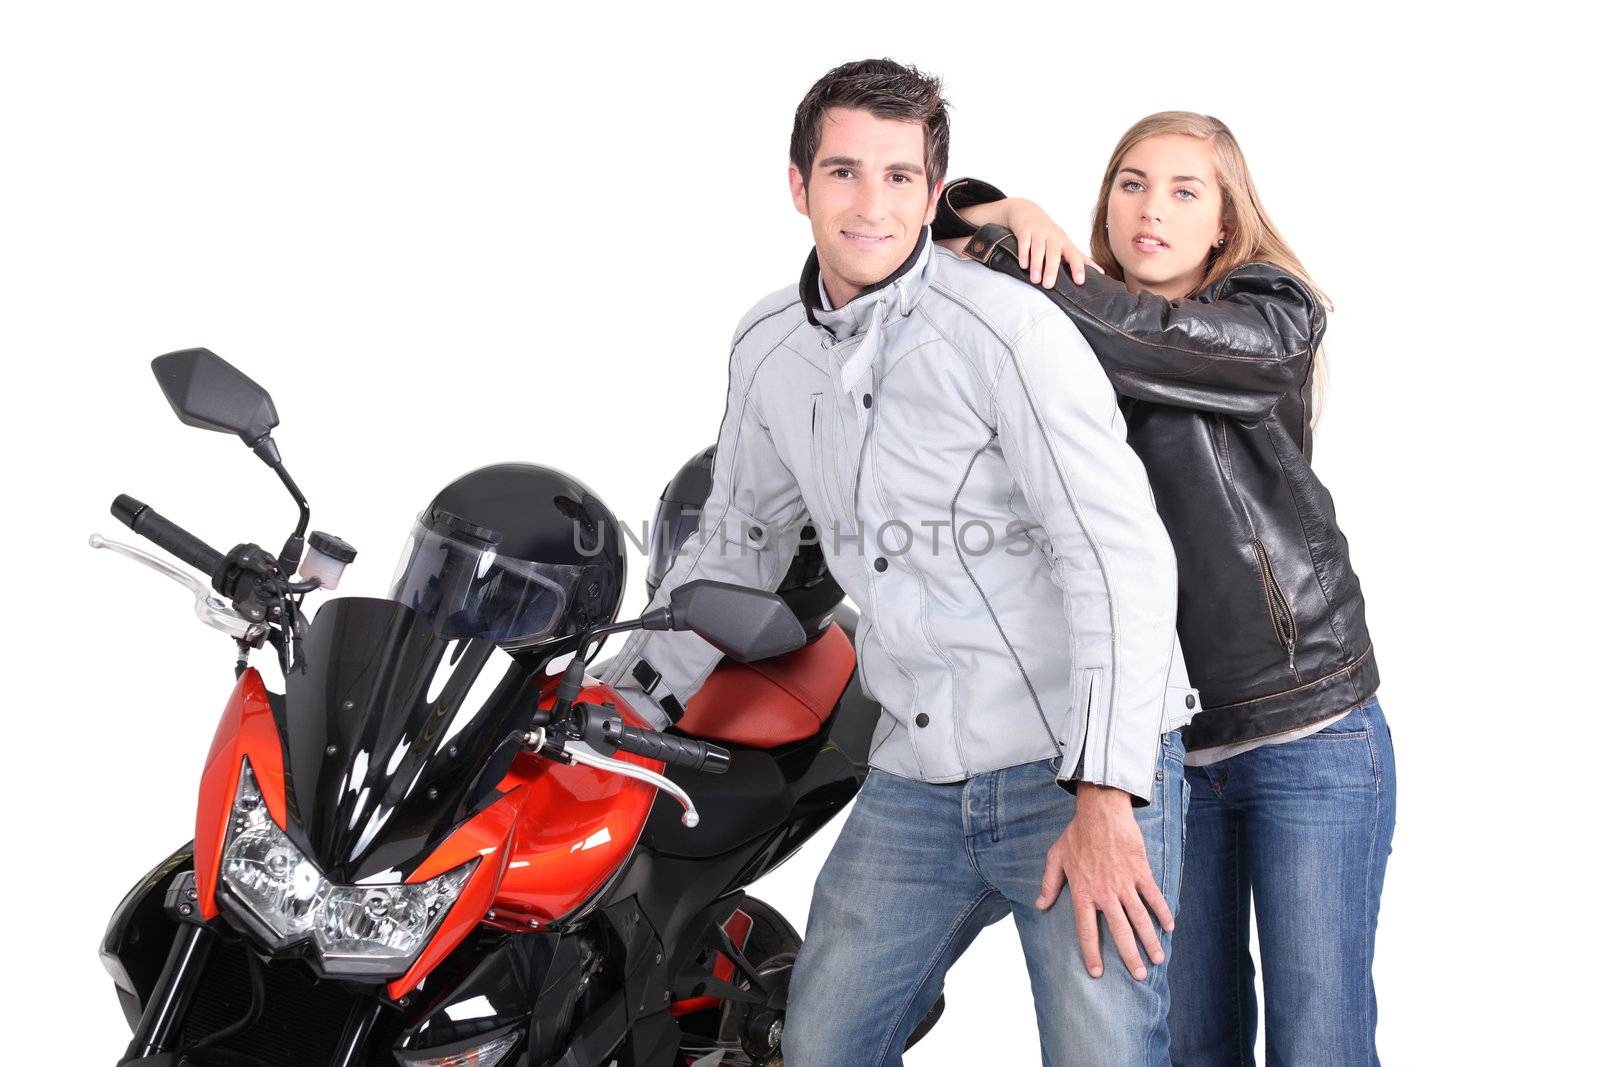 Couple posing next to motorcycle by phovoir